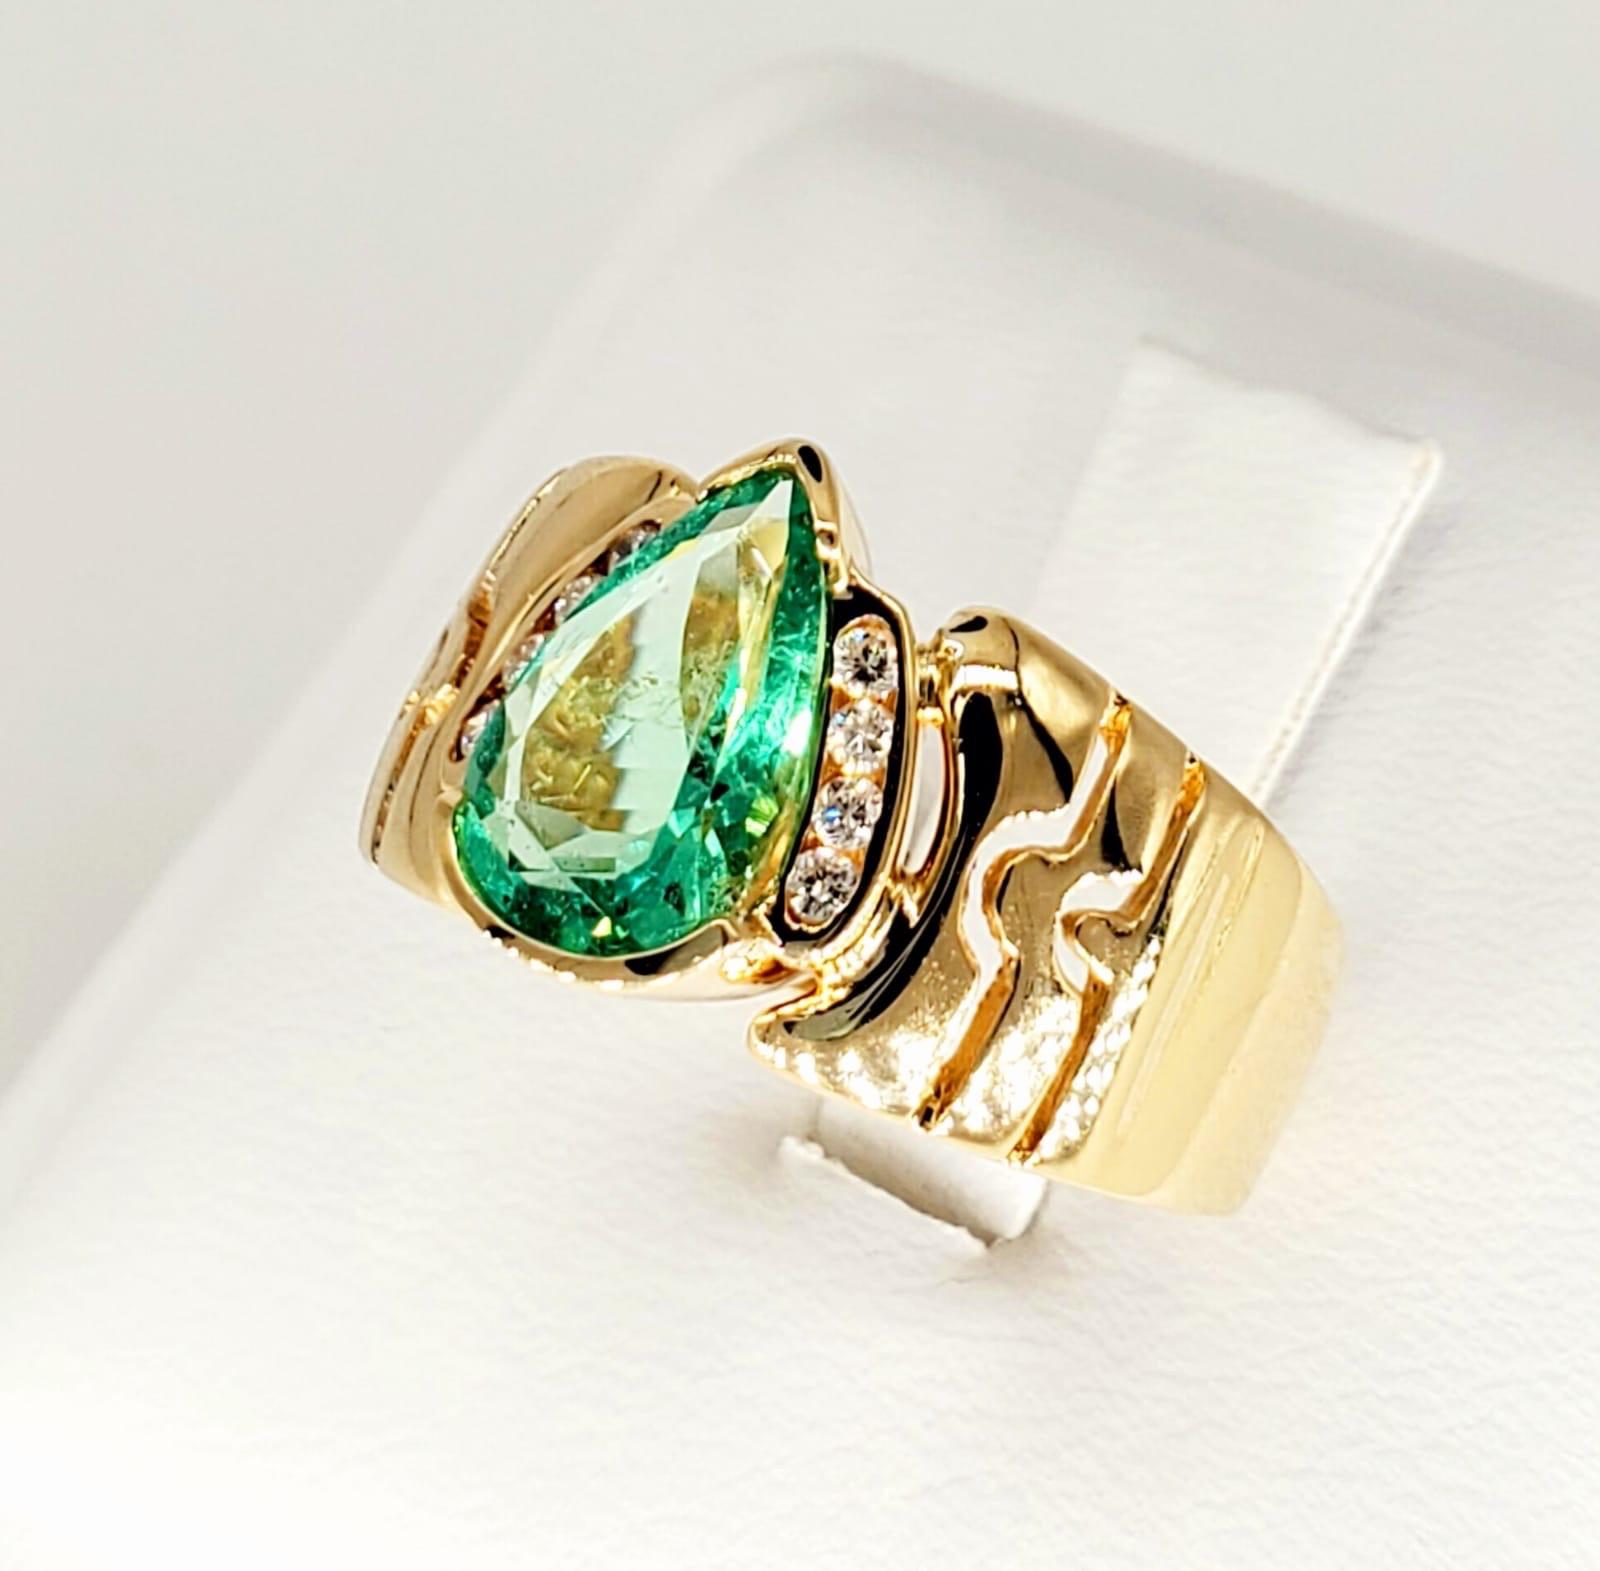 Vintage 1.75 Carat Colombian Emerald Cocktail Ring. The ring features a beautiful transparent pear shape Colombian emerald weighing 1.60 carat and surrounding diamonds weighting approx 0.15 carats. The ring is a size 8 and weights 8.1 grams solid